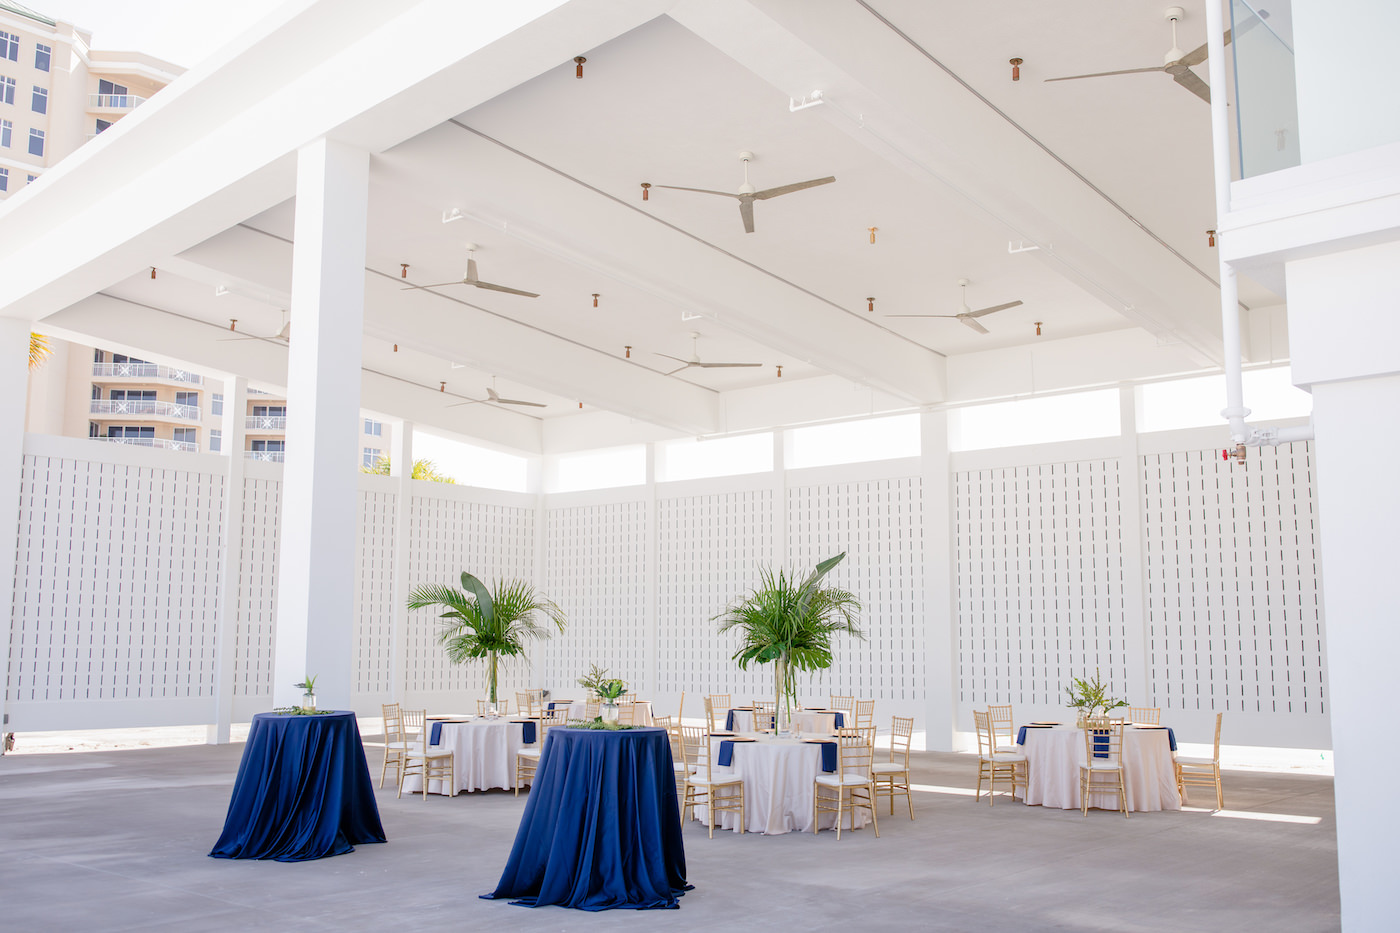 Clearwater Beach Wedding Venue Hilton Clearwater Beach | Modern Tropical Beach Outdoor Wedding Reception Terrace with White Table Linens and Navy Napkins under Gold Charger Plates | Gold Chiavari Chairs and Champagne Sash Bows and Tropical Palm Frond Leaf Floral Arrangement Centerpieces